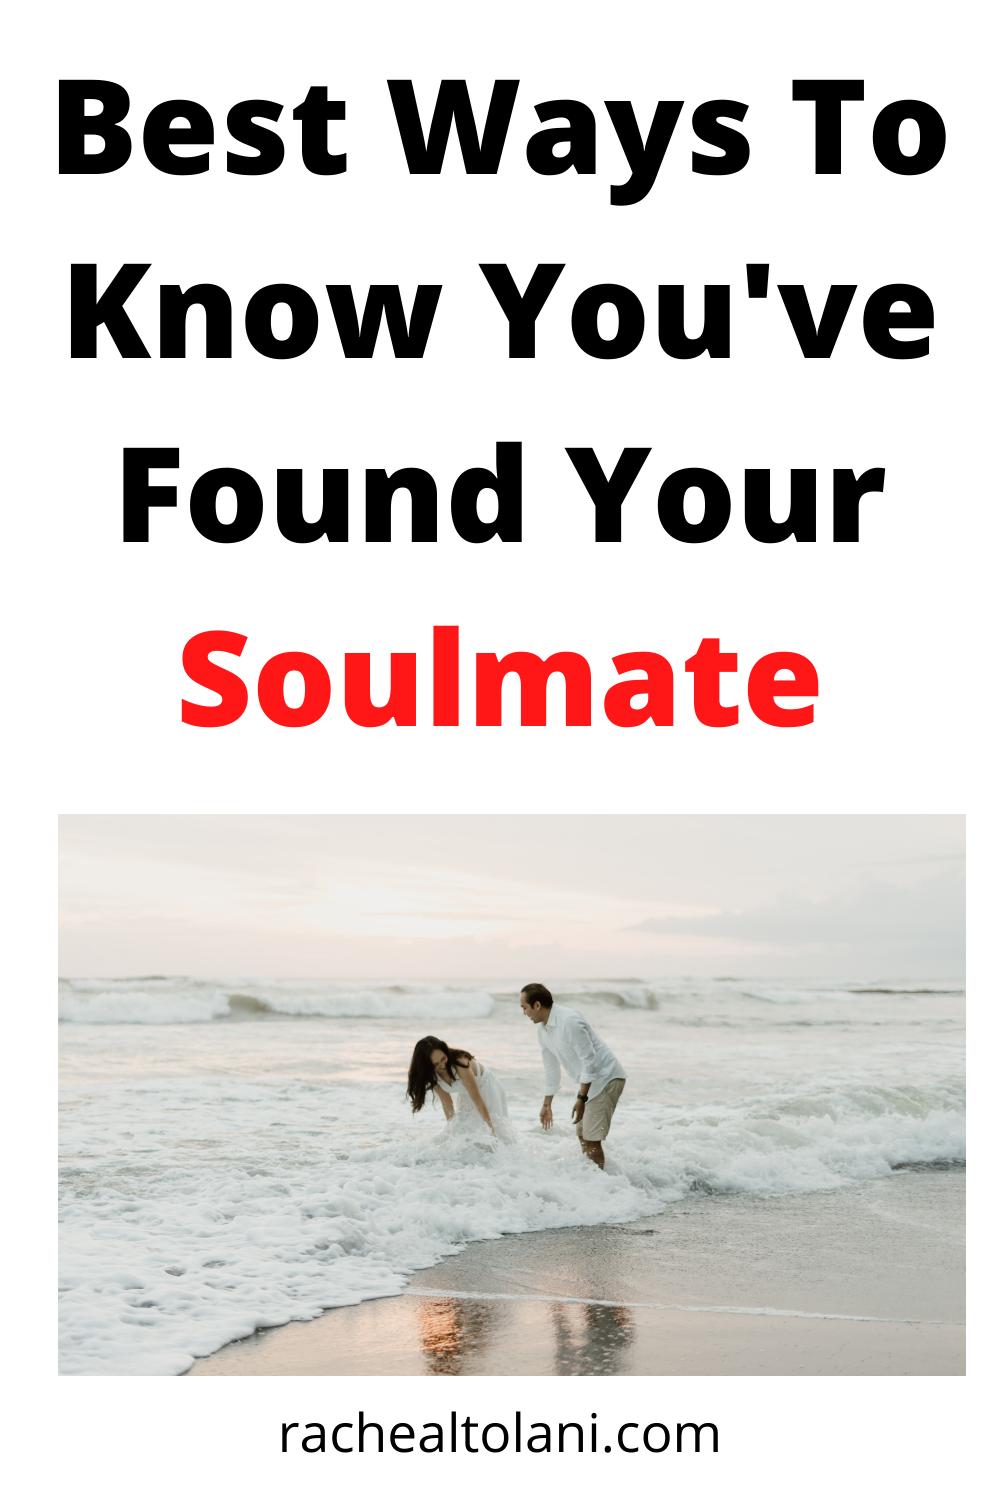 How to find your soulmate